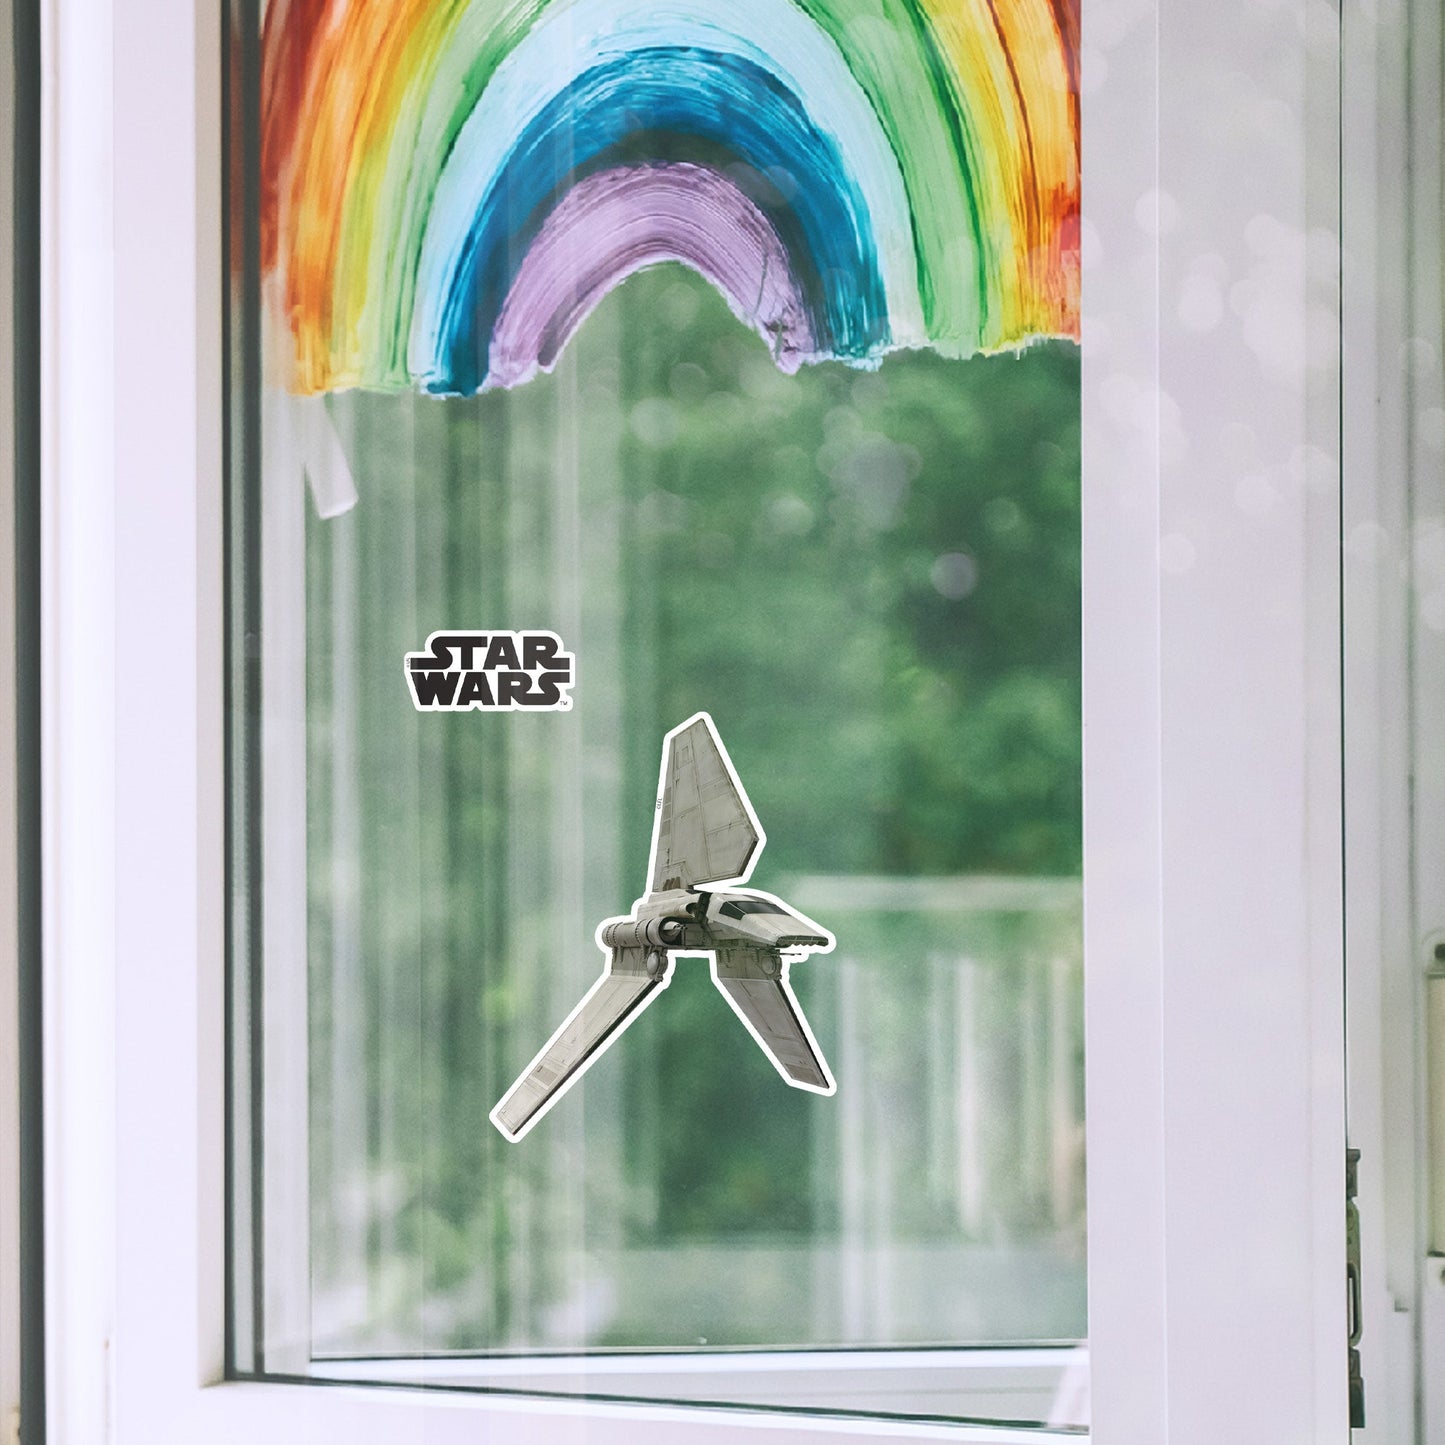 Imperial Shuttle_semiprofile Window Clings - Officially Licensed Star Wars Removable Window Static Decal